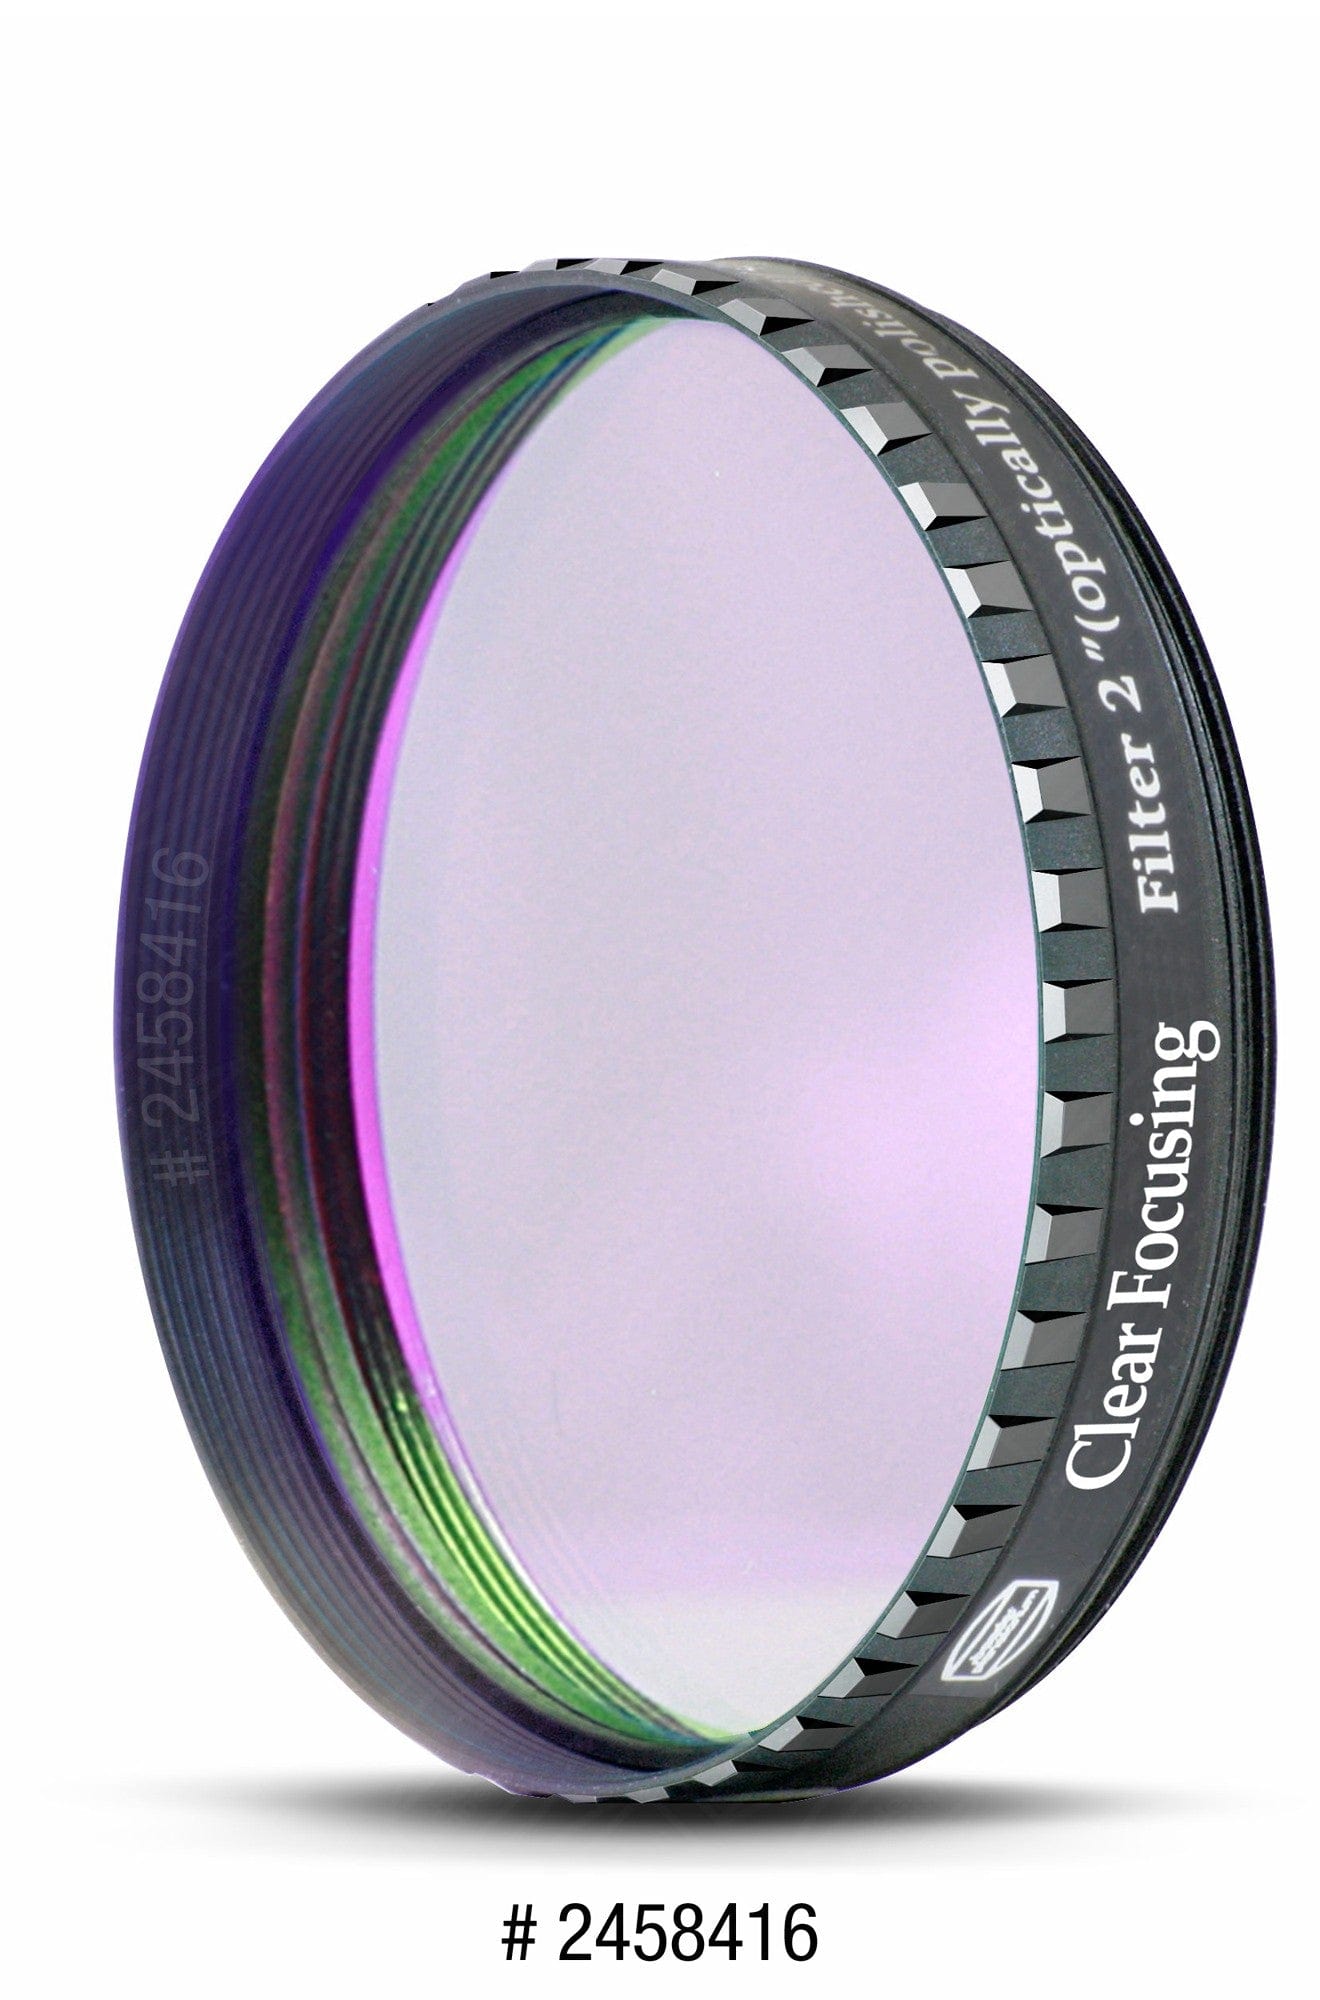 Baader Planetarium Accessory Baader Clear Focusing Filter 2" (Optically Polished, with LPFC) - 2458416